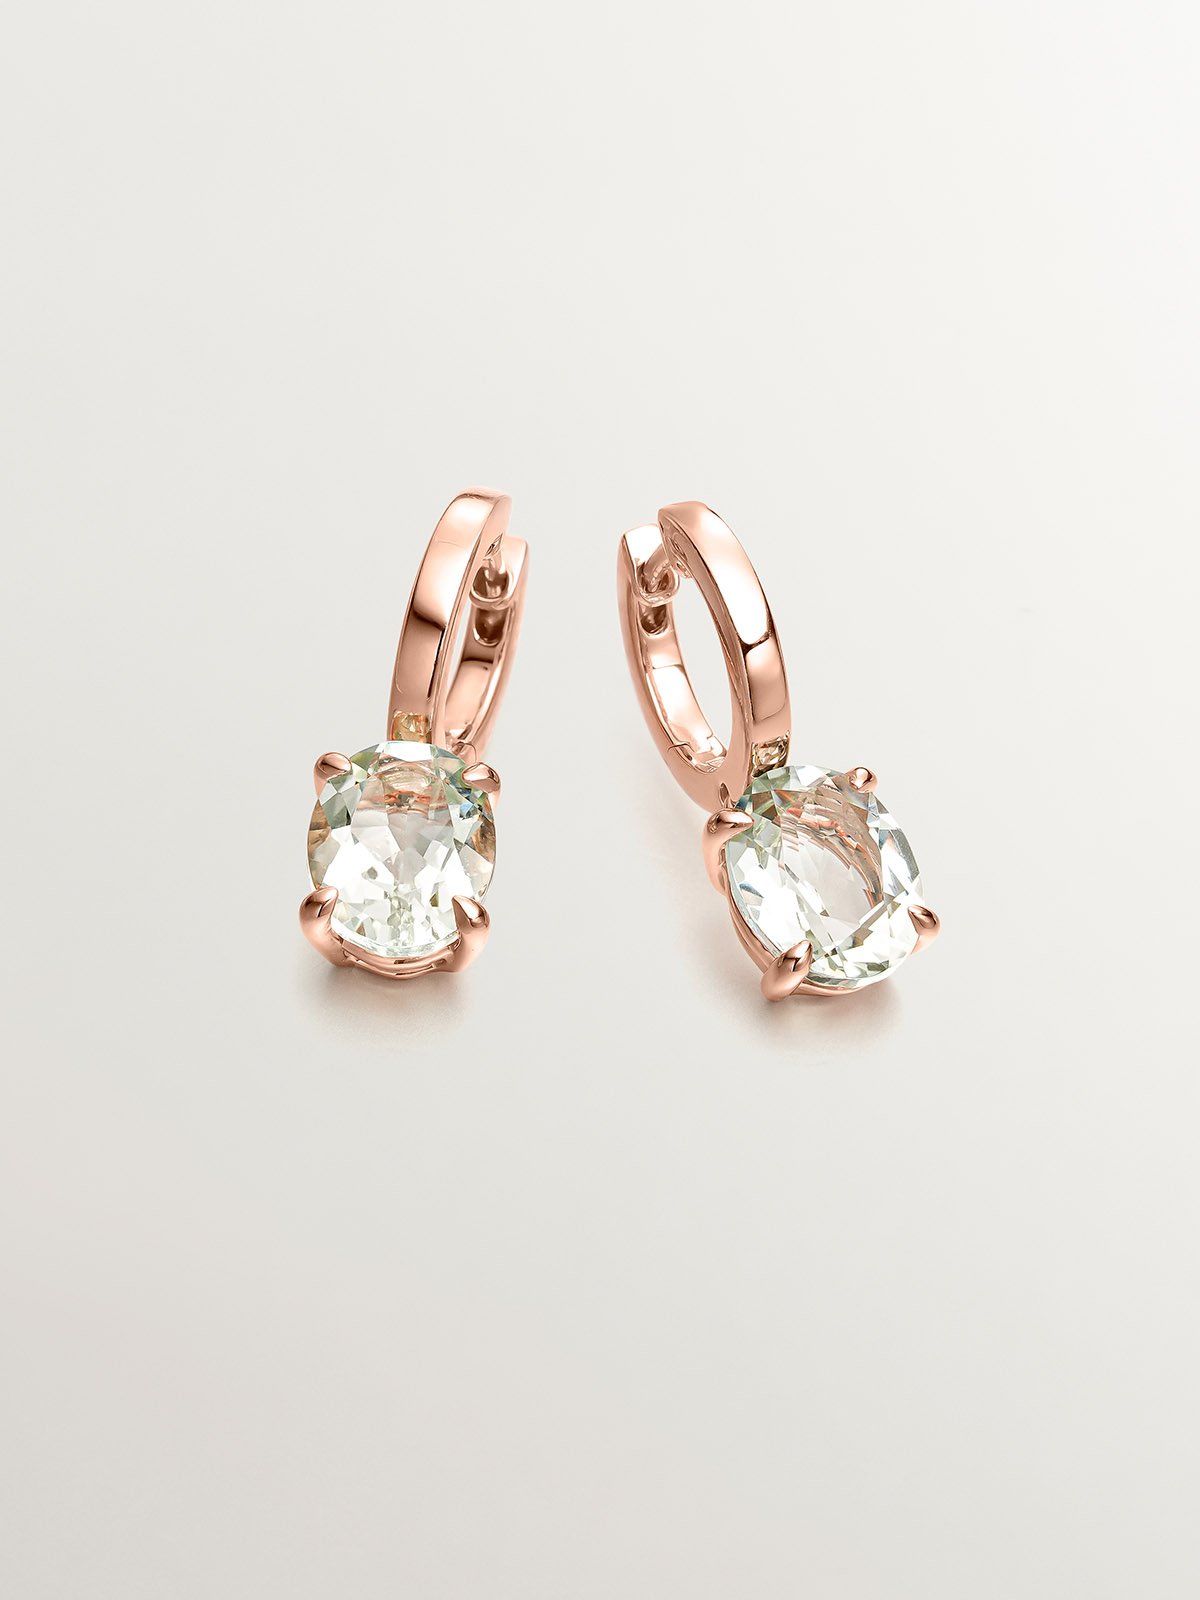 Medium-sized 925 silver hoop earrings bathed in 18K rose gold with green quartz.